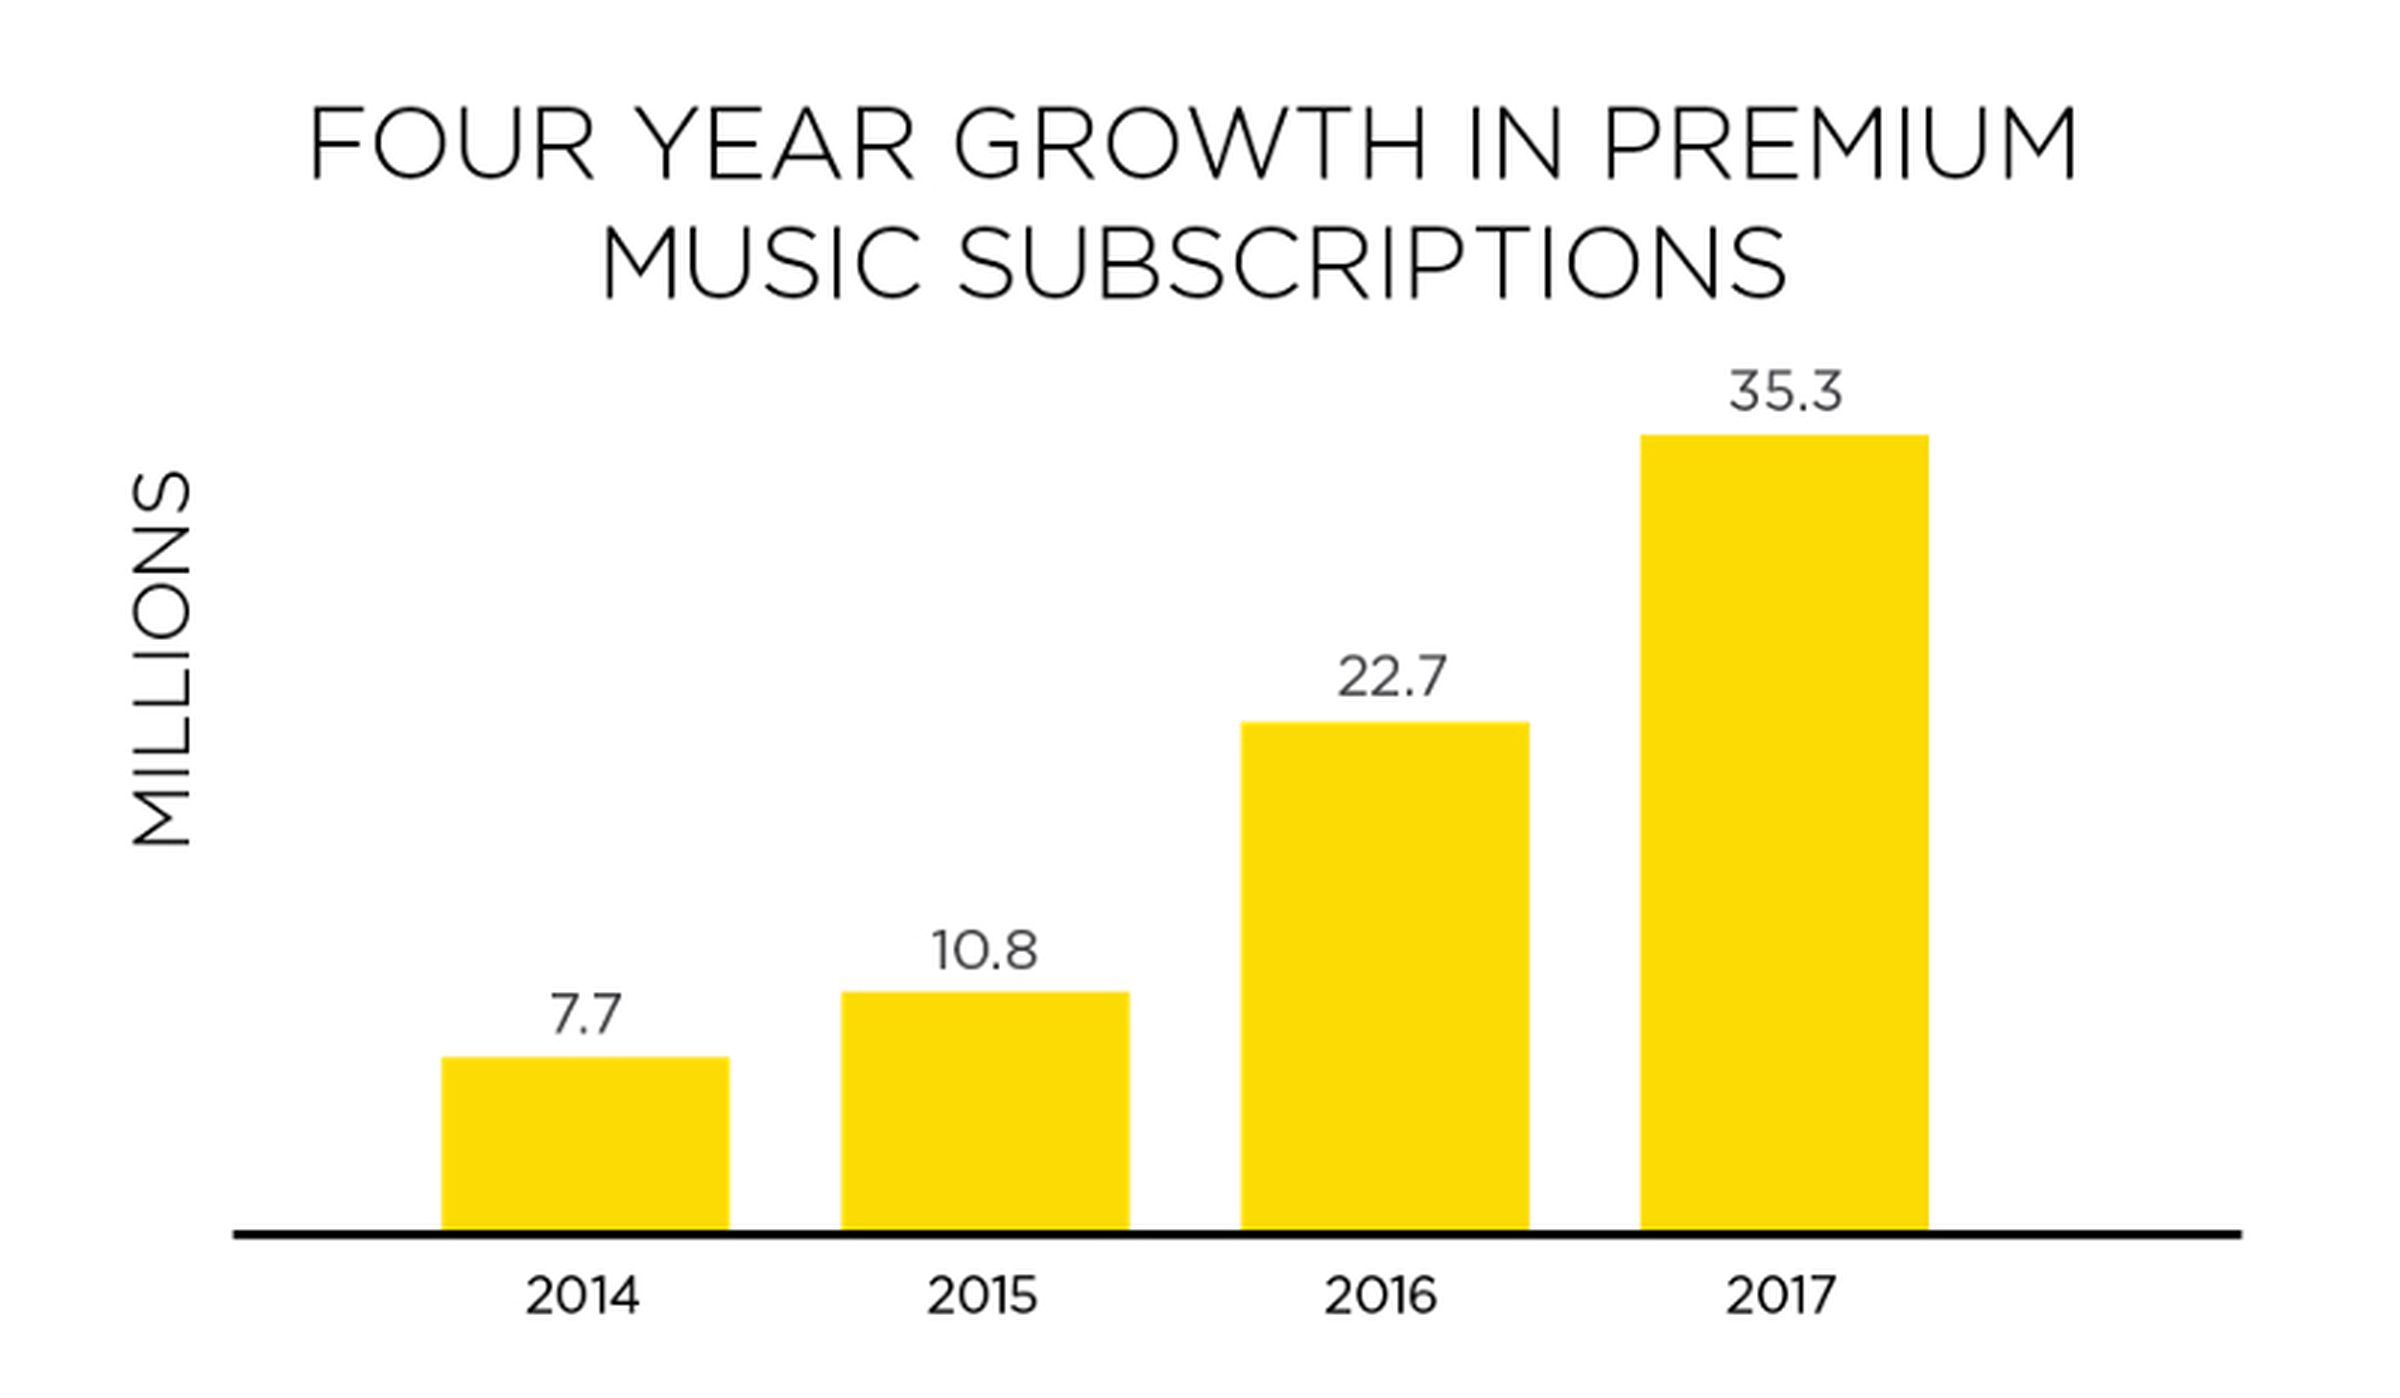 Four year growth in premium music subscription